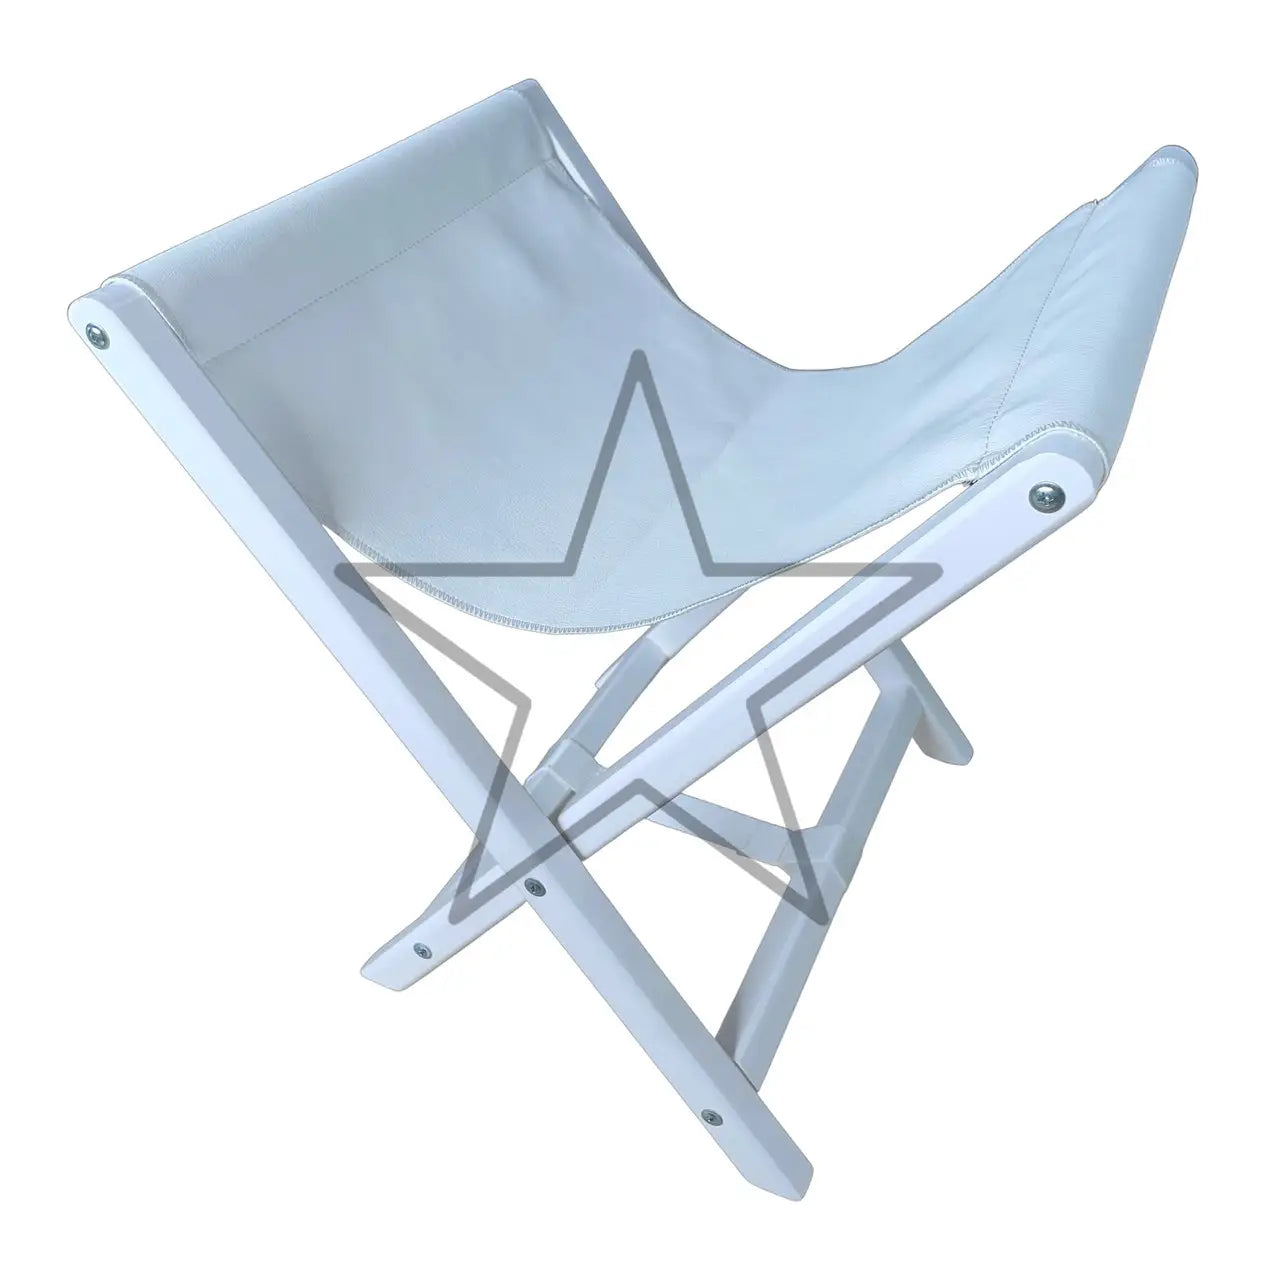 AIR MAX Bag stand(white eco-leather on white legs)